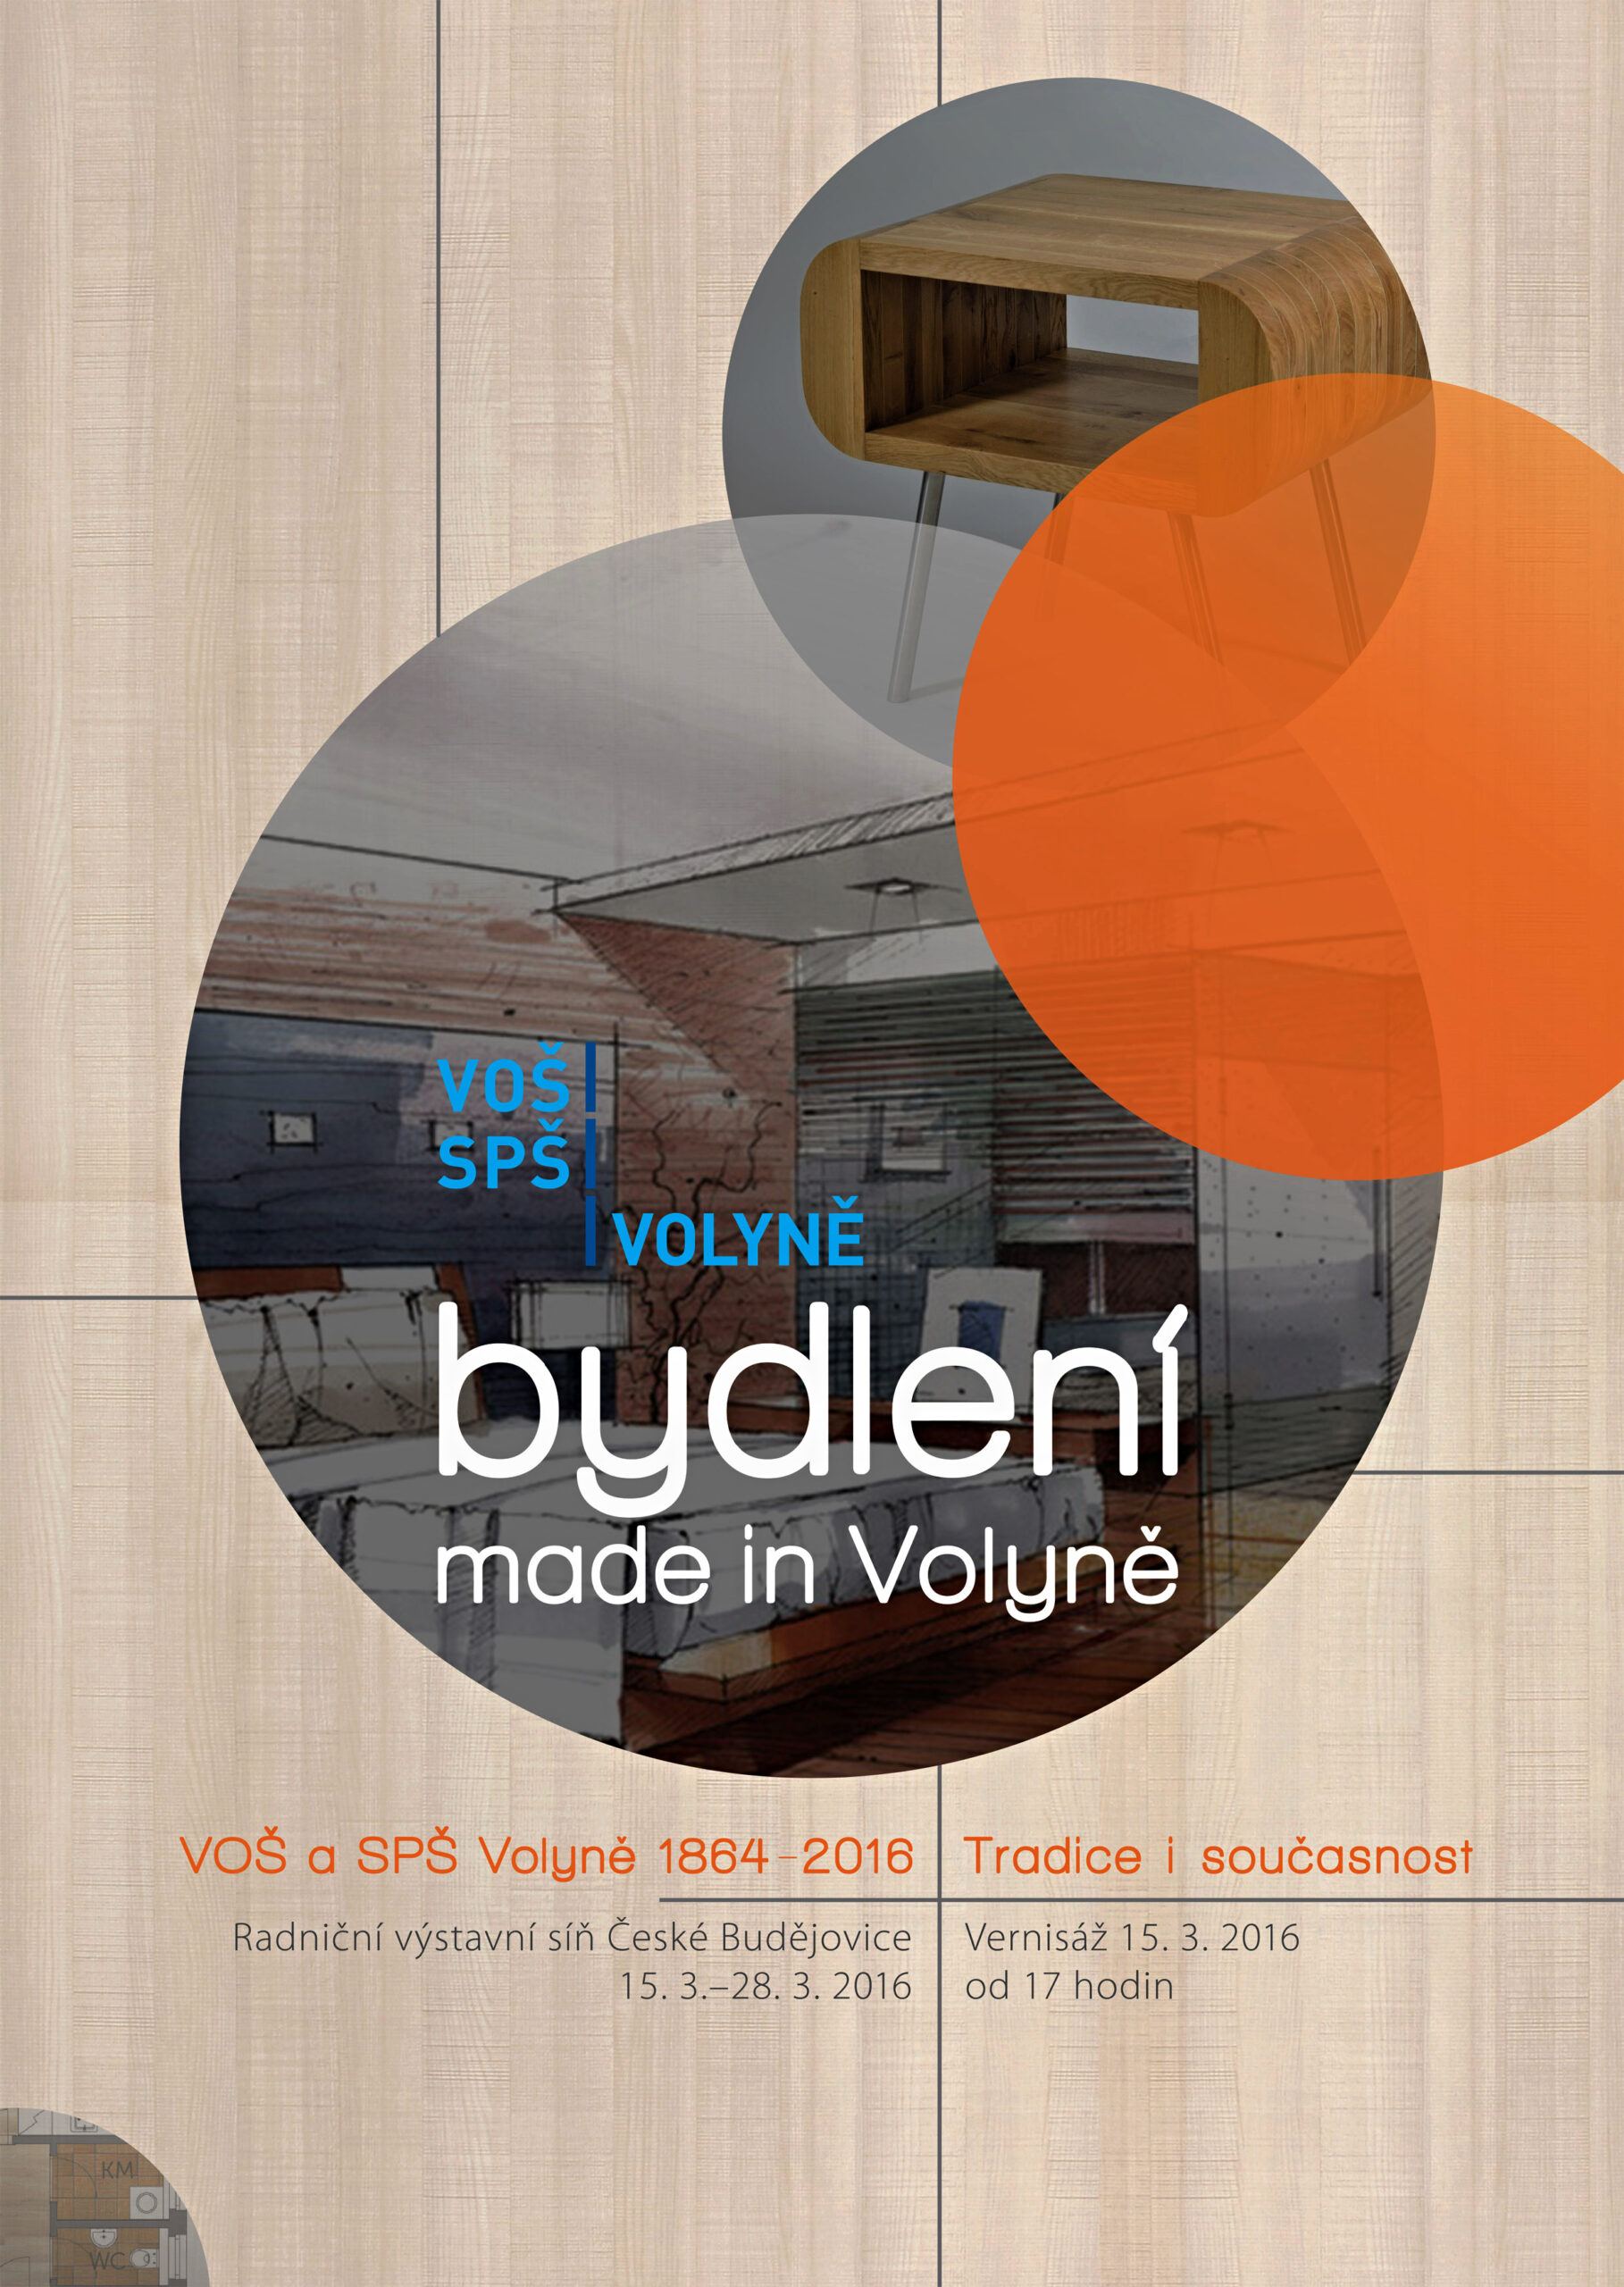 bydleni made in volyne